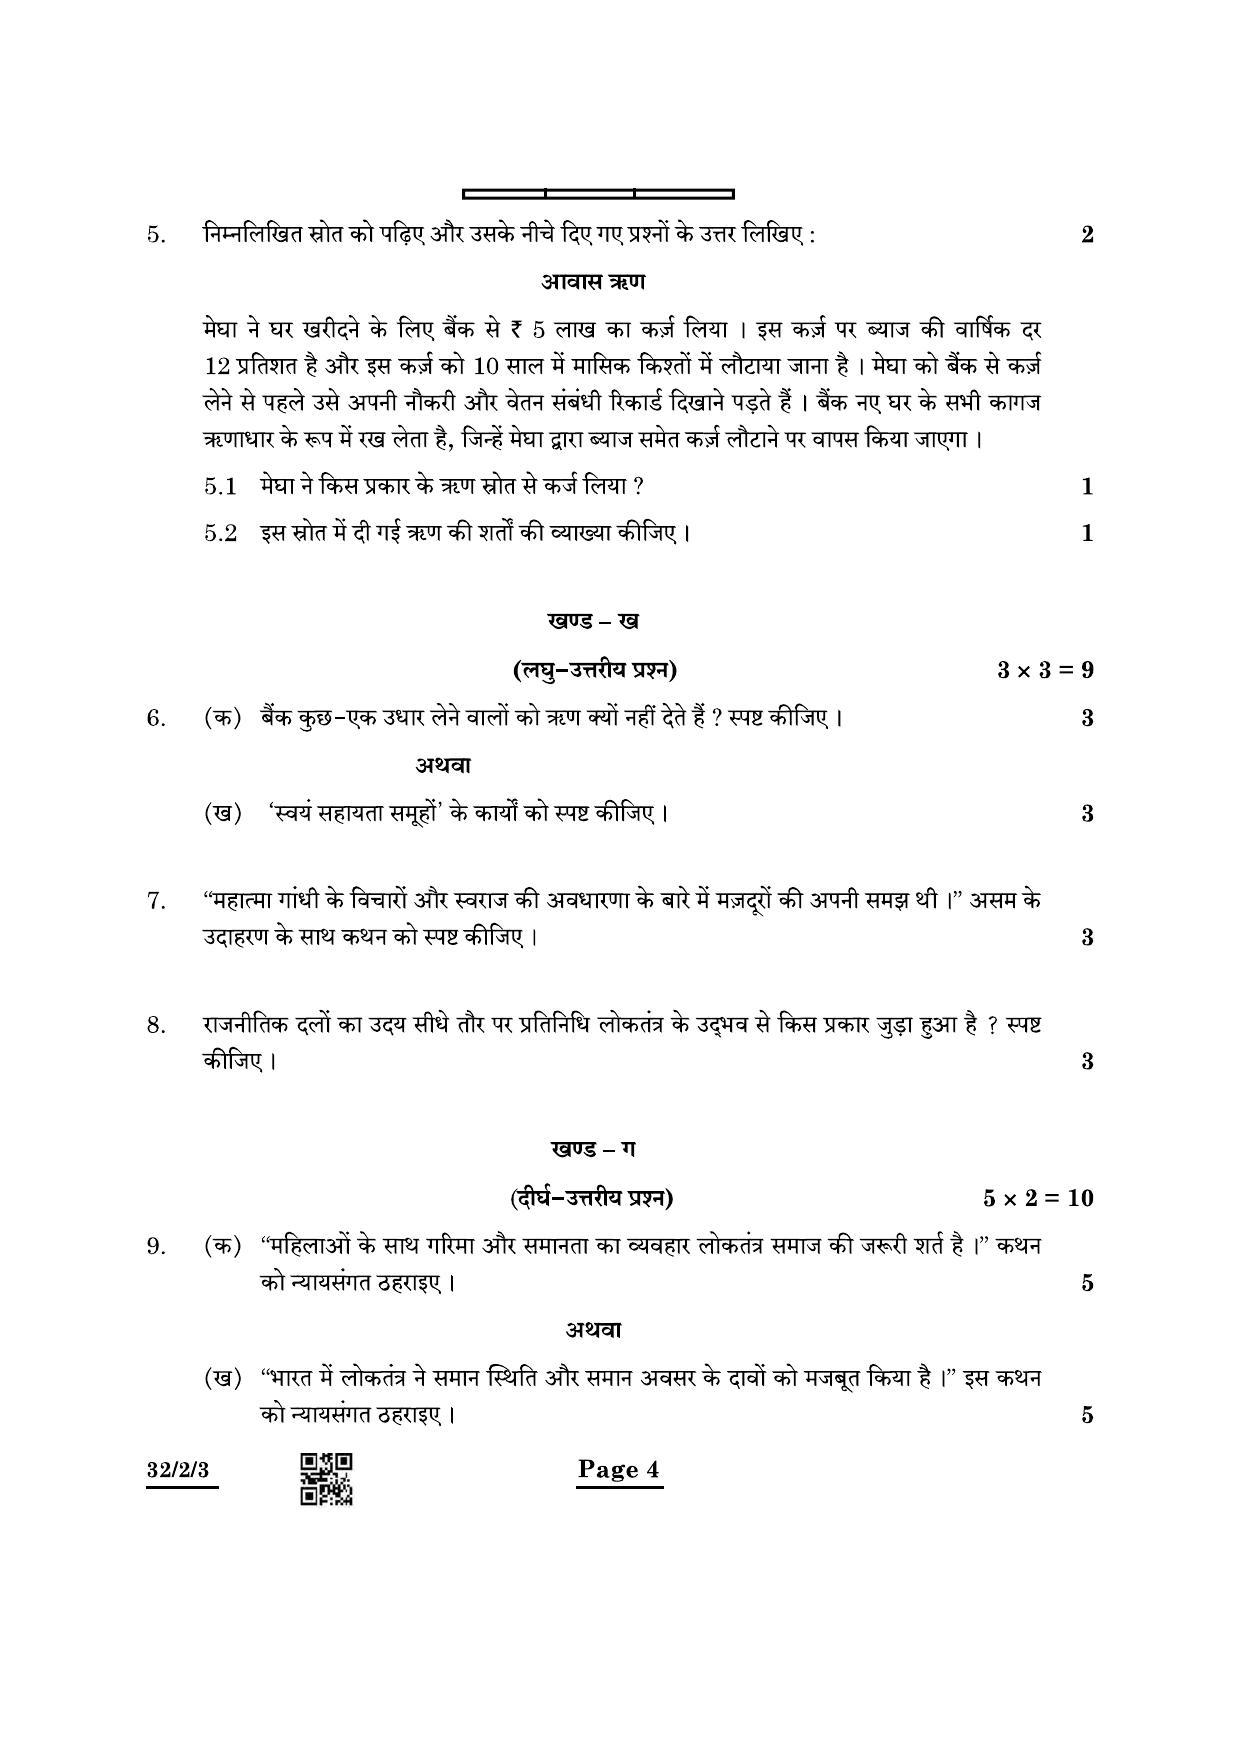 CBSE Class 10 32-2-3 Social Science 2022 Question Paper - Page 4